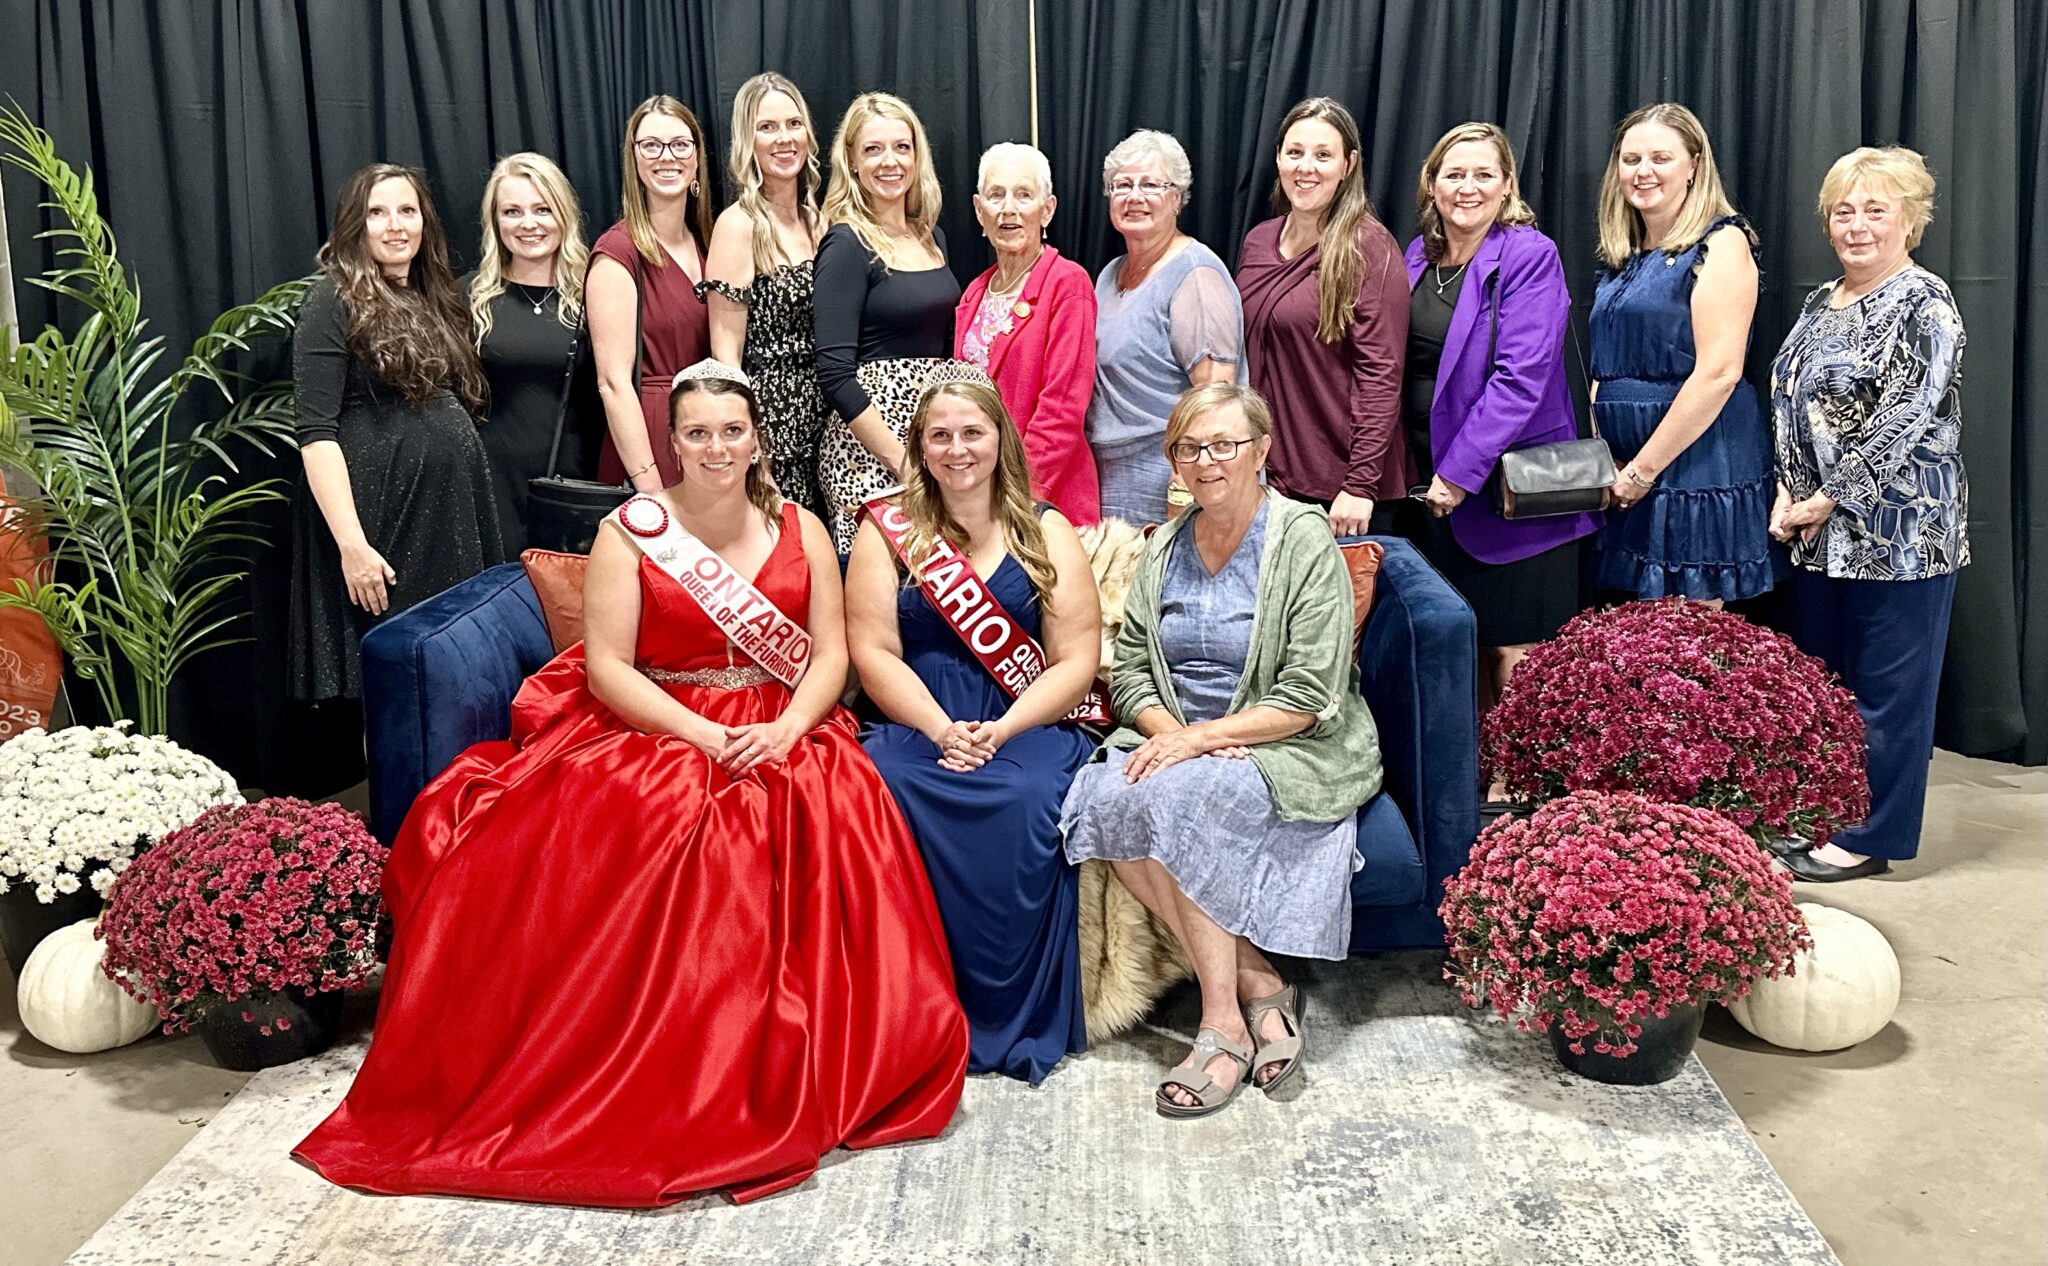 Group photo of former Queens of the Furrow